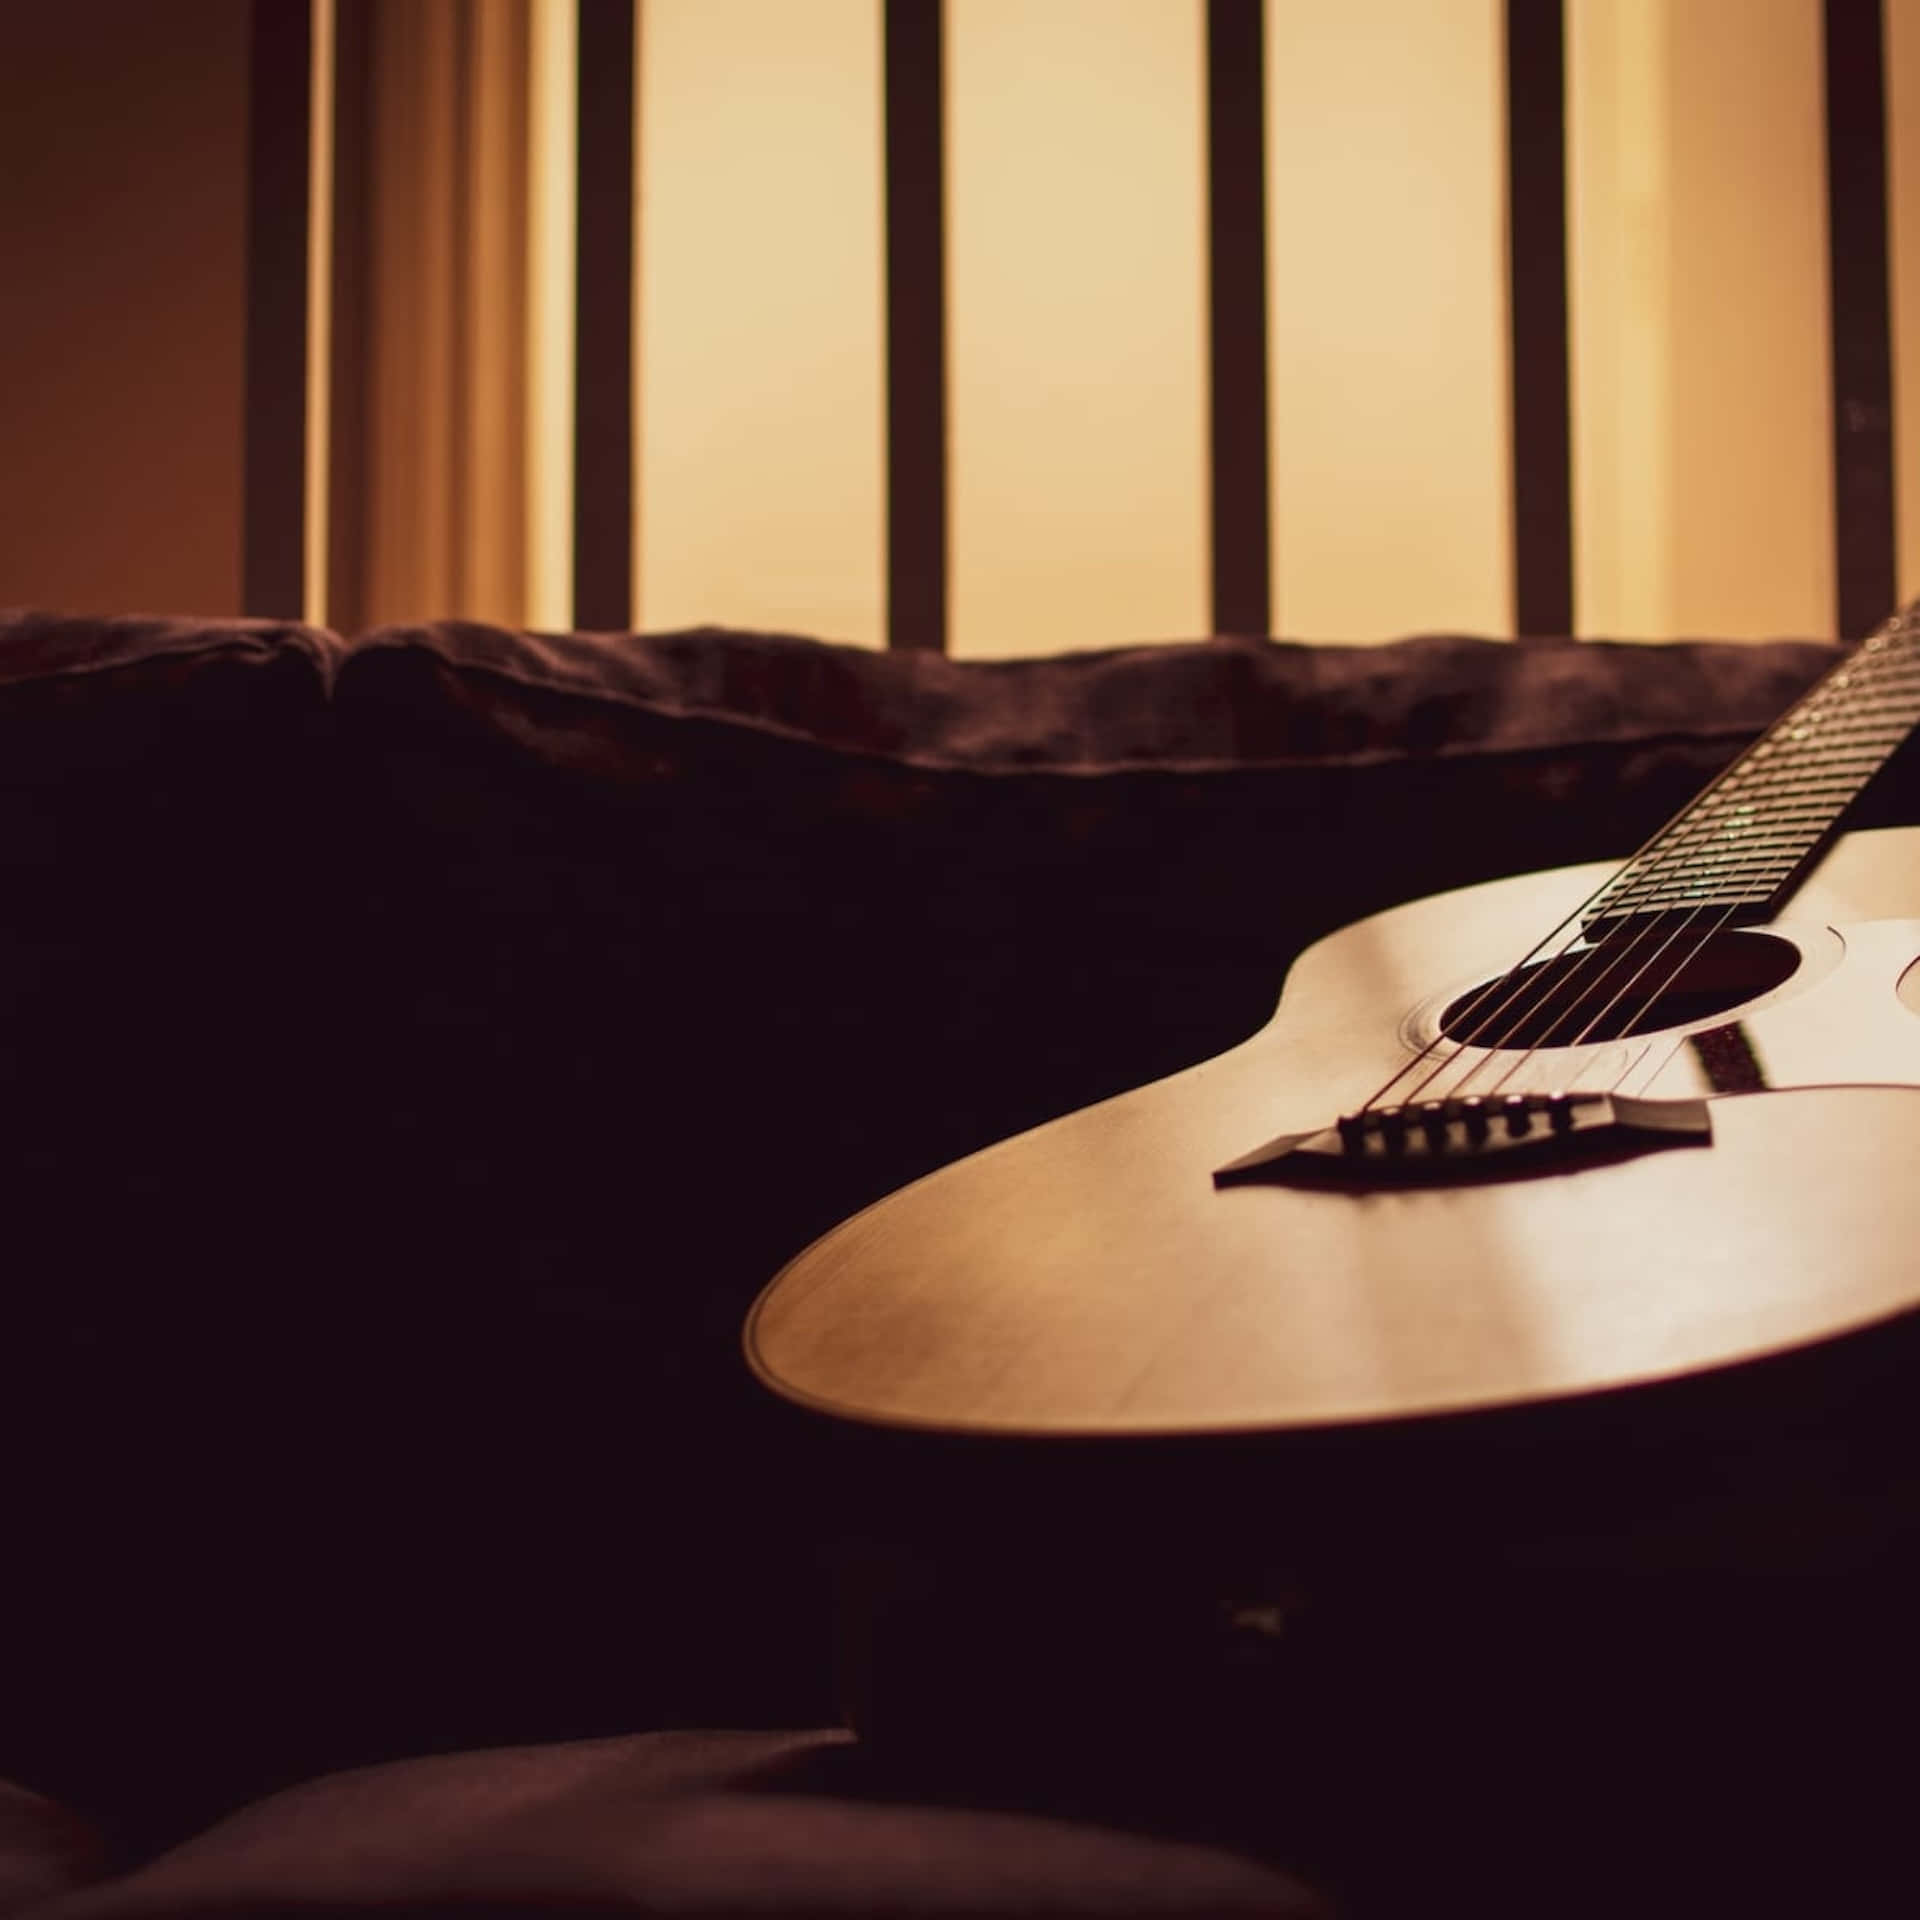 Acoustic Guitar Warm Lighting Background